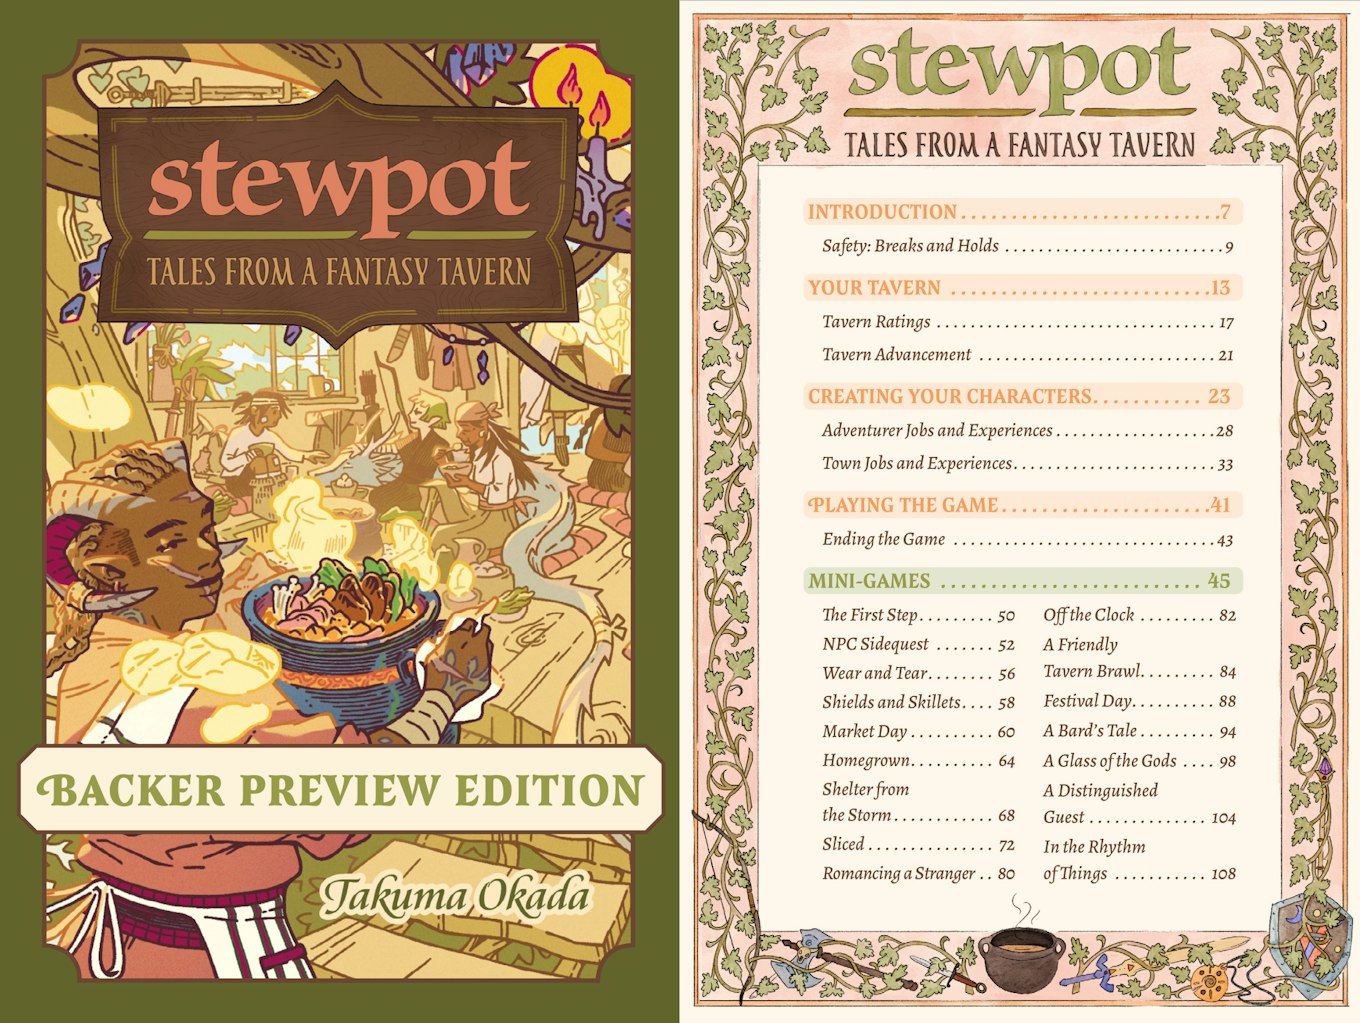 The cover for the Backer Preview Edition of Stewpot, plus the table of contents